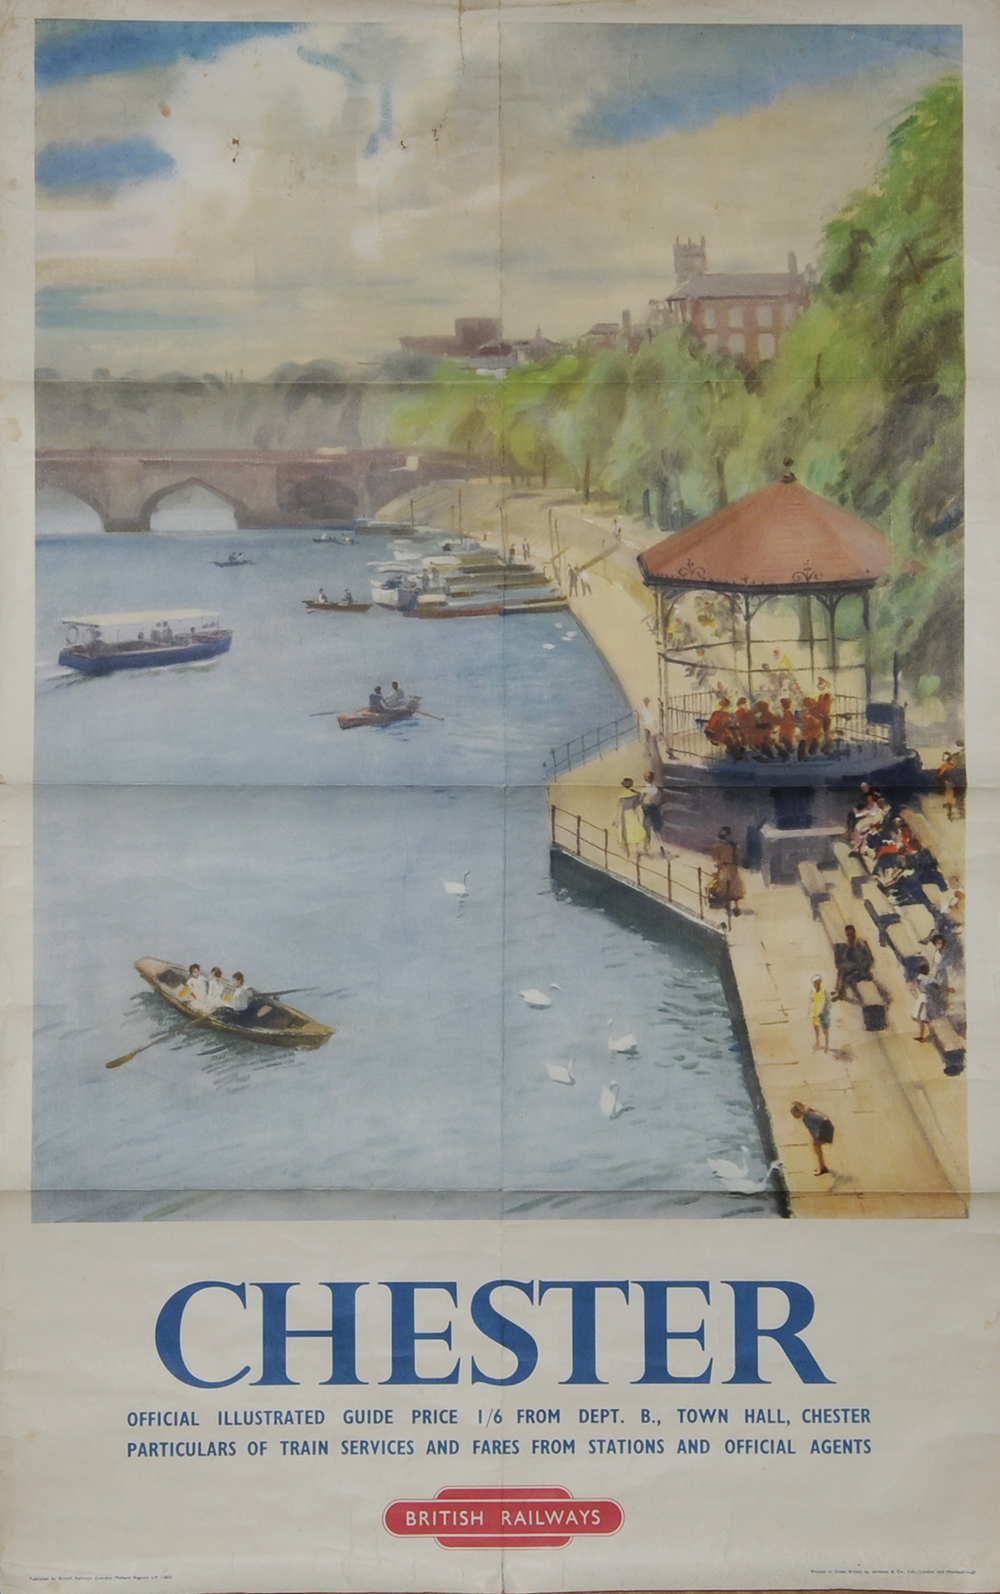 Poster 'Chester' anon, D/R size. A pleasing scene on the river with boaters, band in bandstand, children feeding swans etc. Published by BR London Midland Region, printed by Jordison